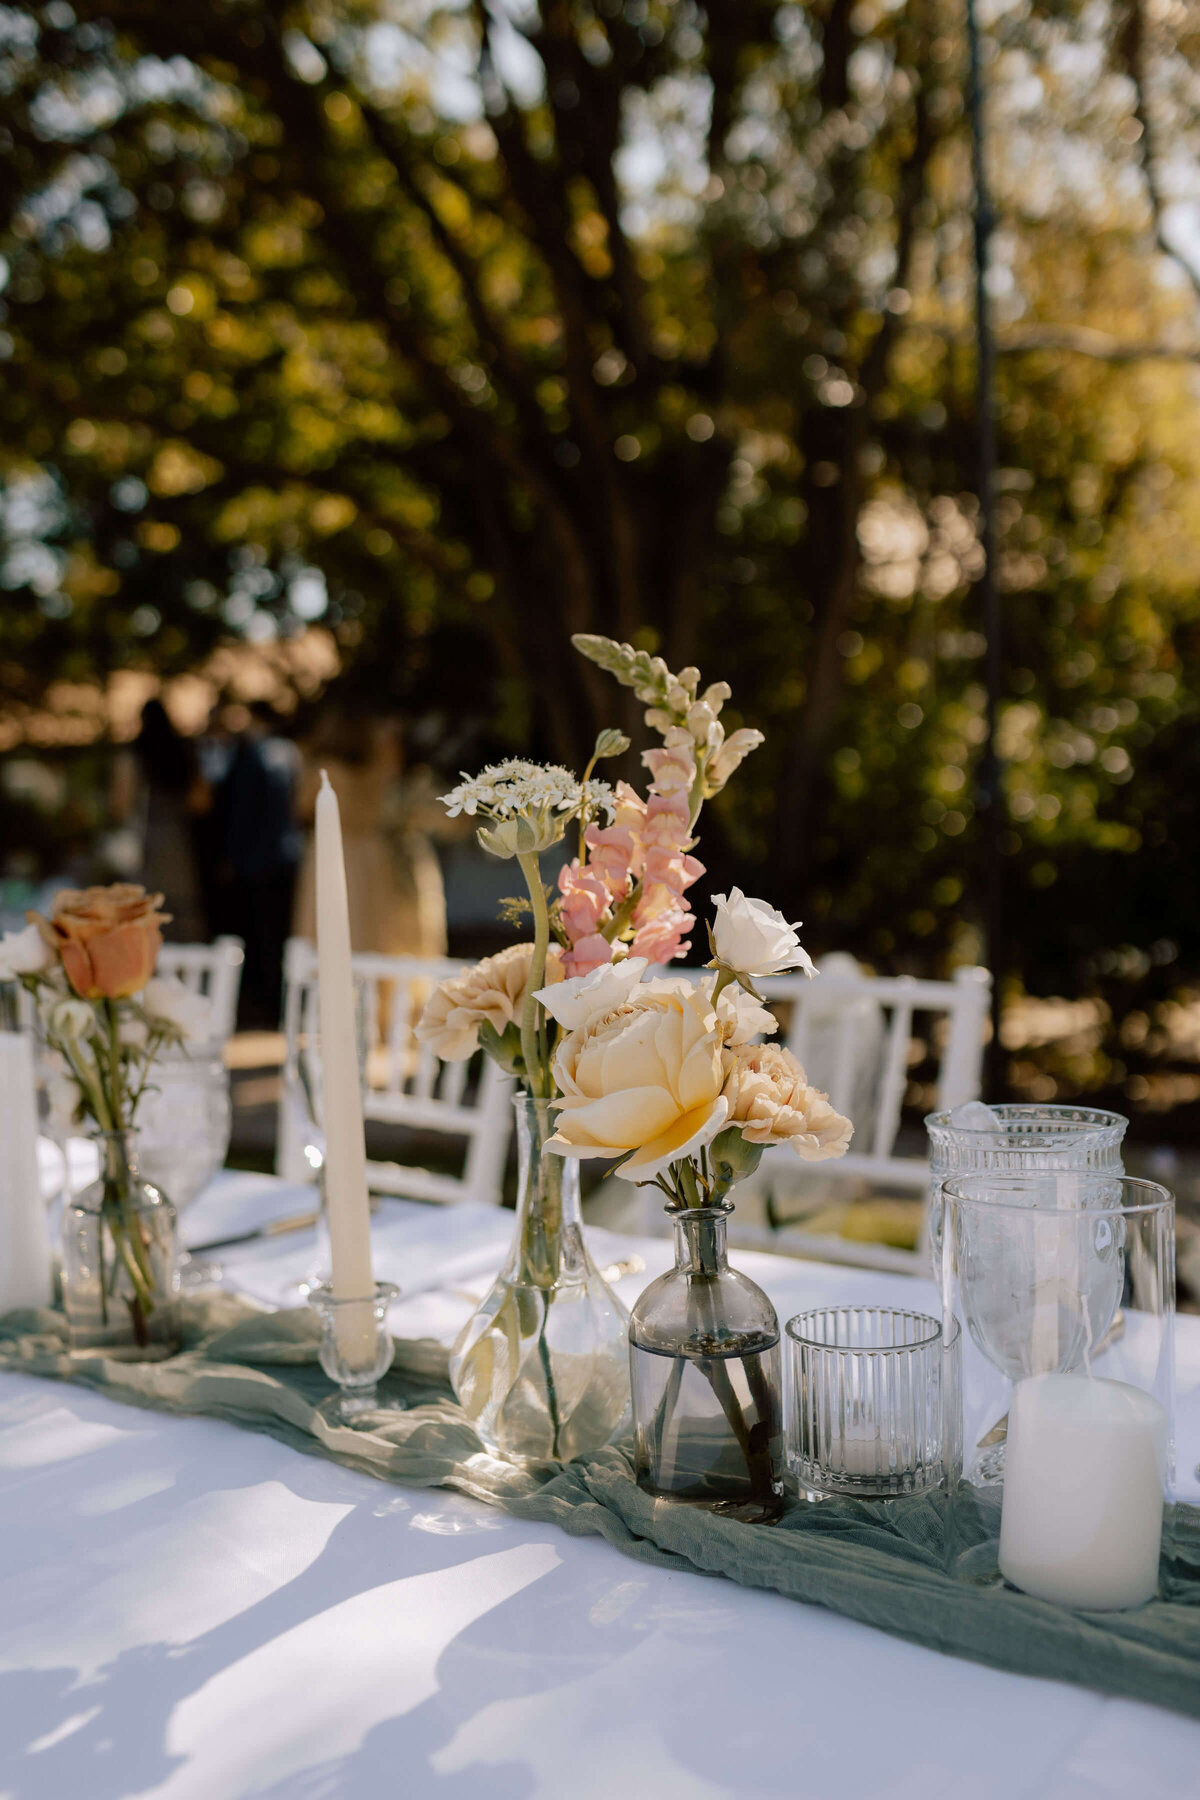 Catholic wedding tablescape with flowers in vases and taper candles